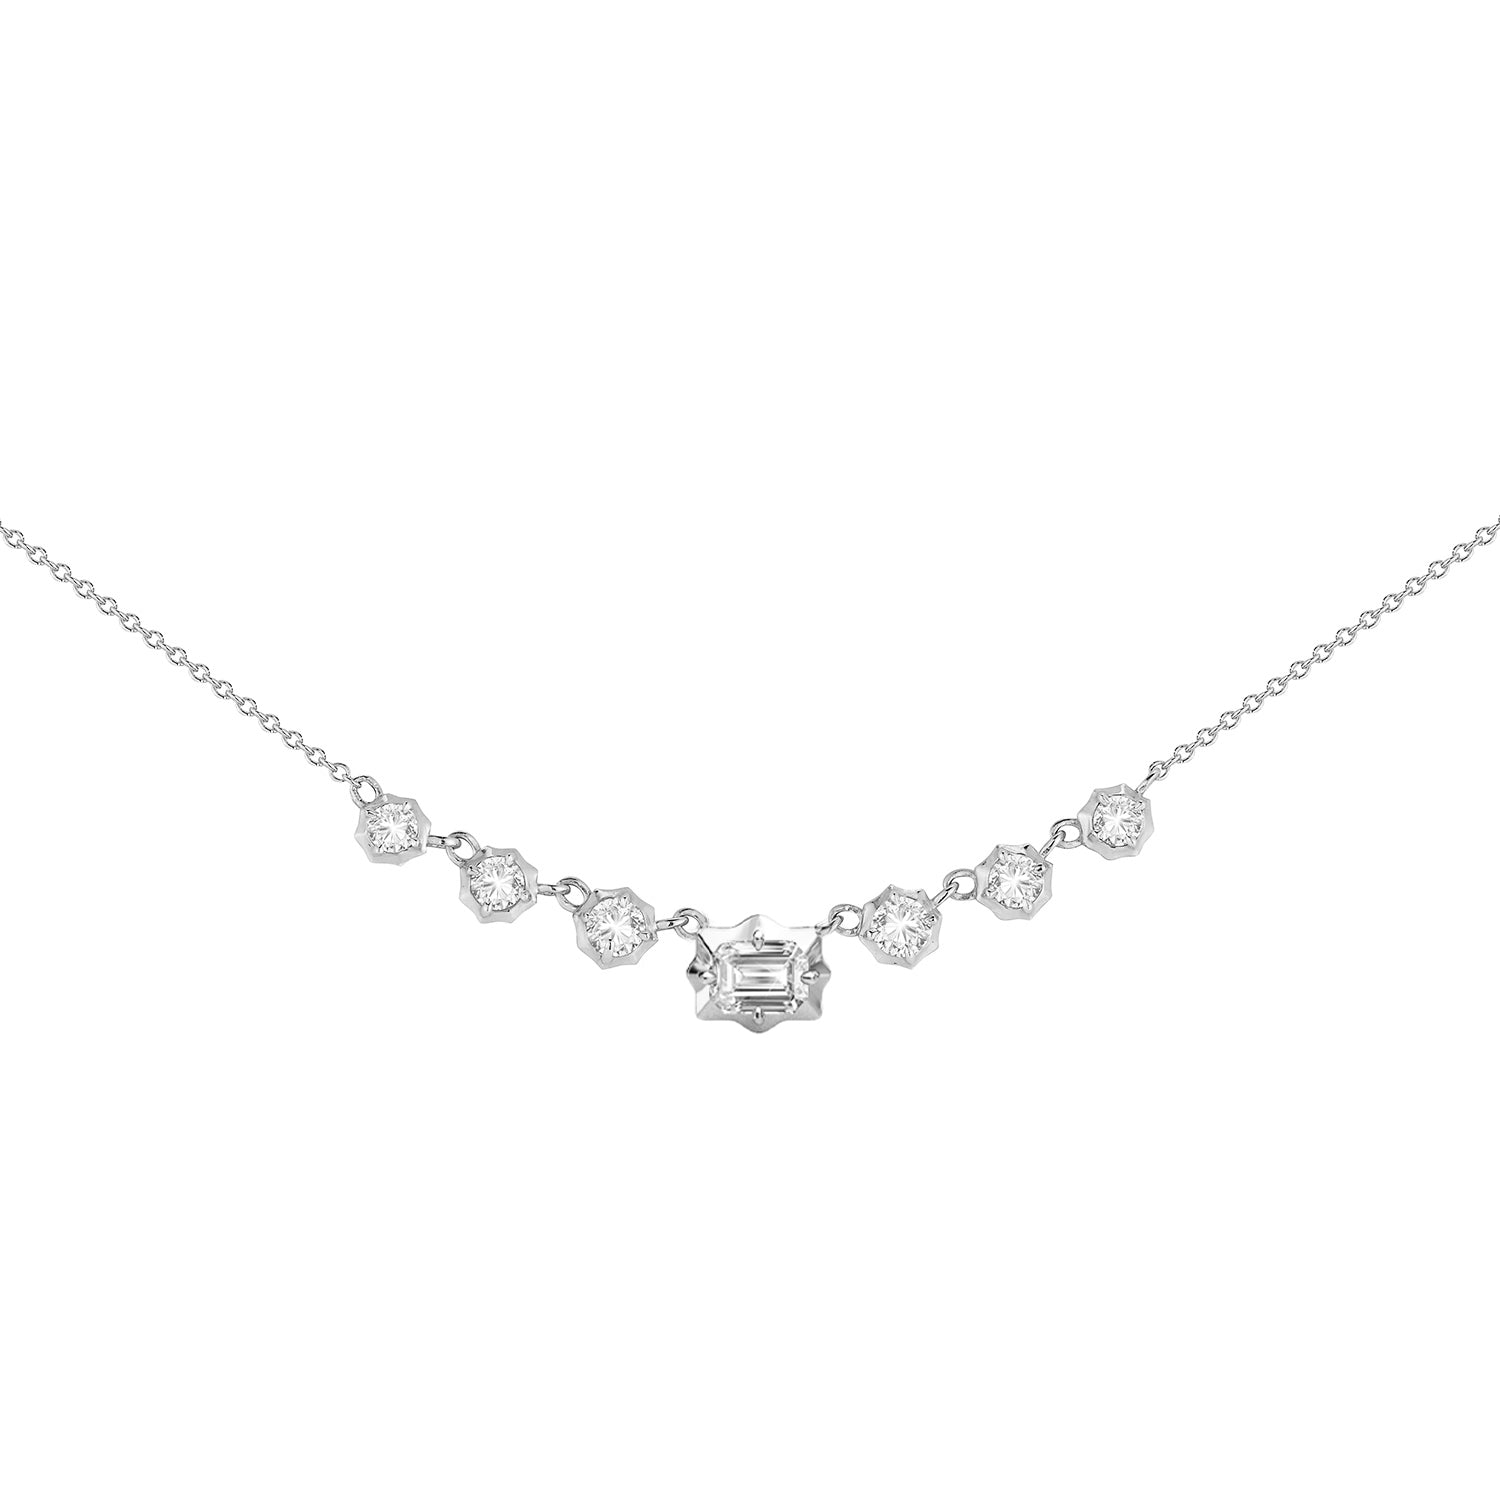 Small Vanguard Necklace in 18K White Gold